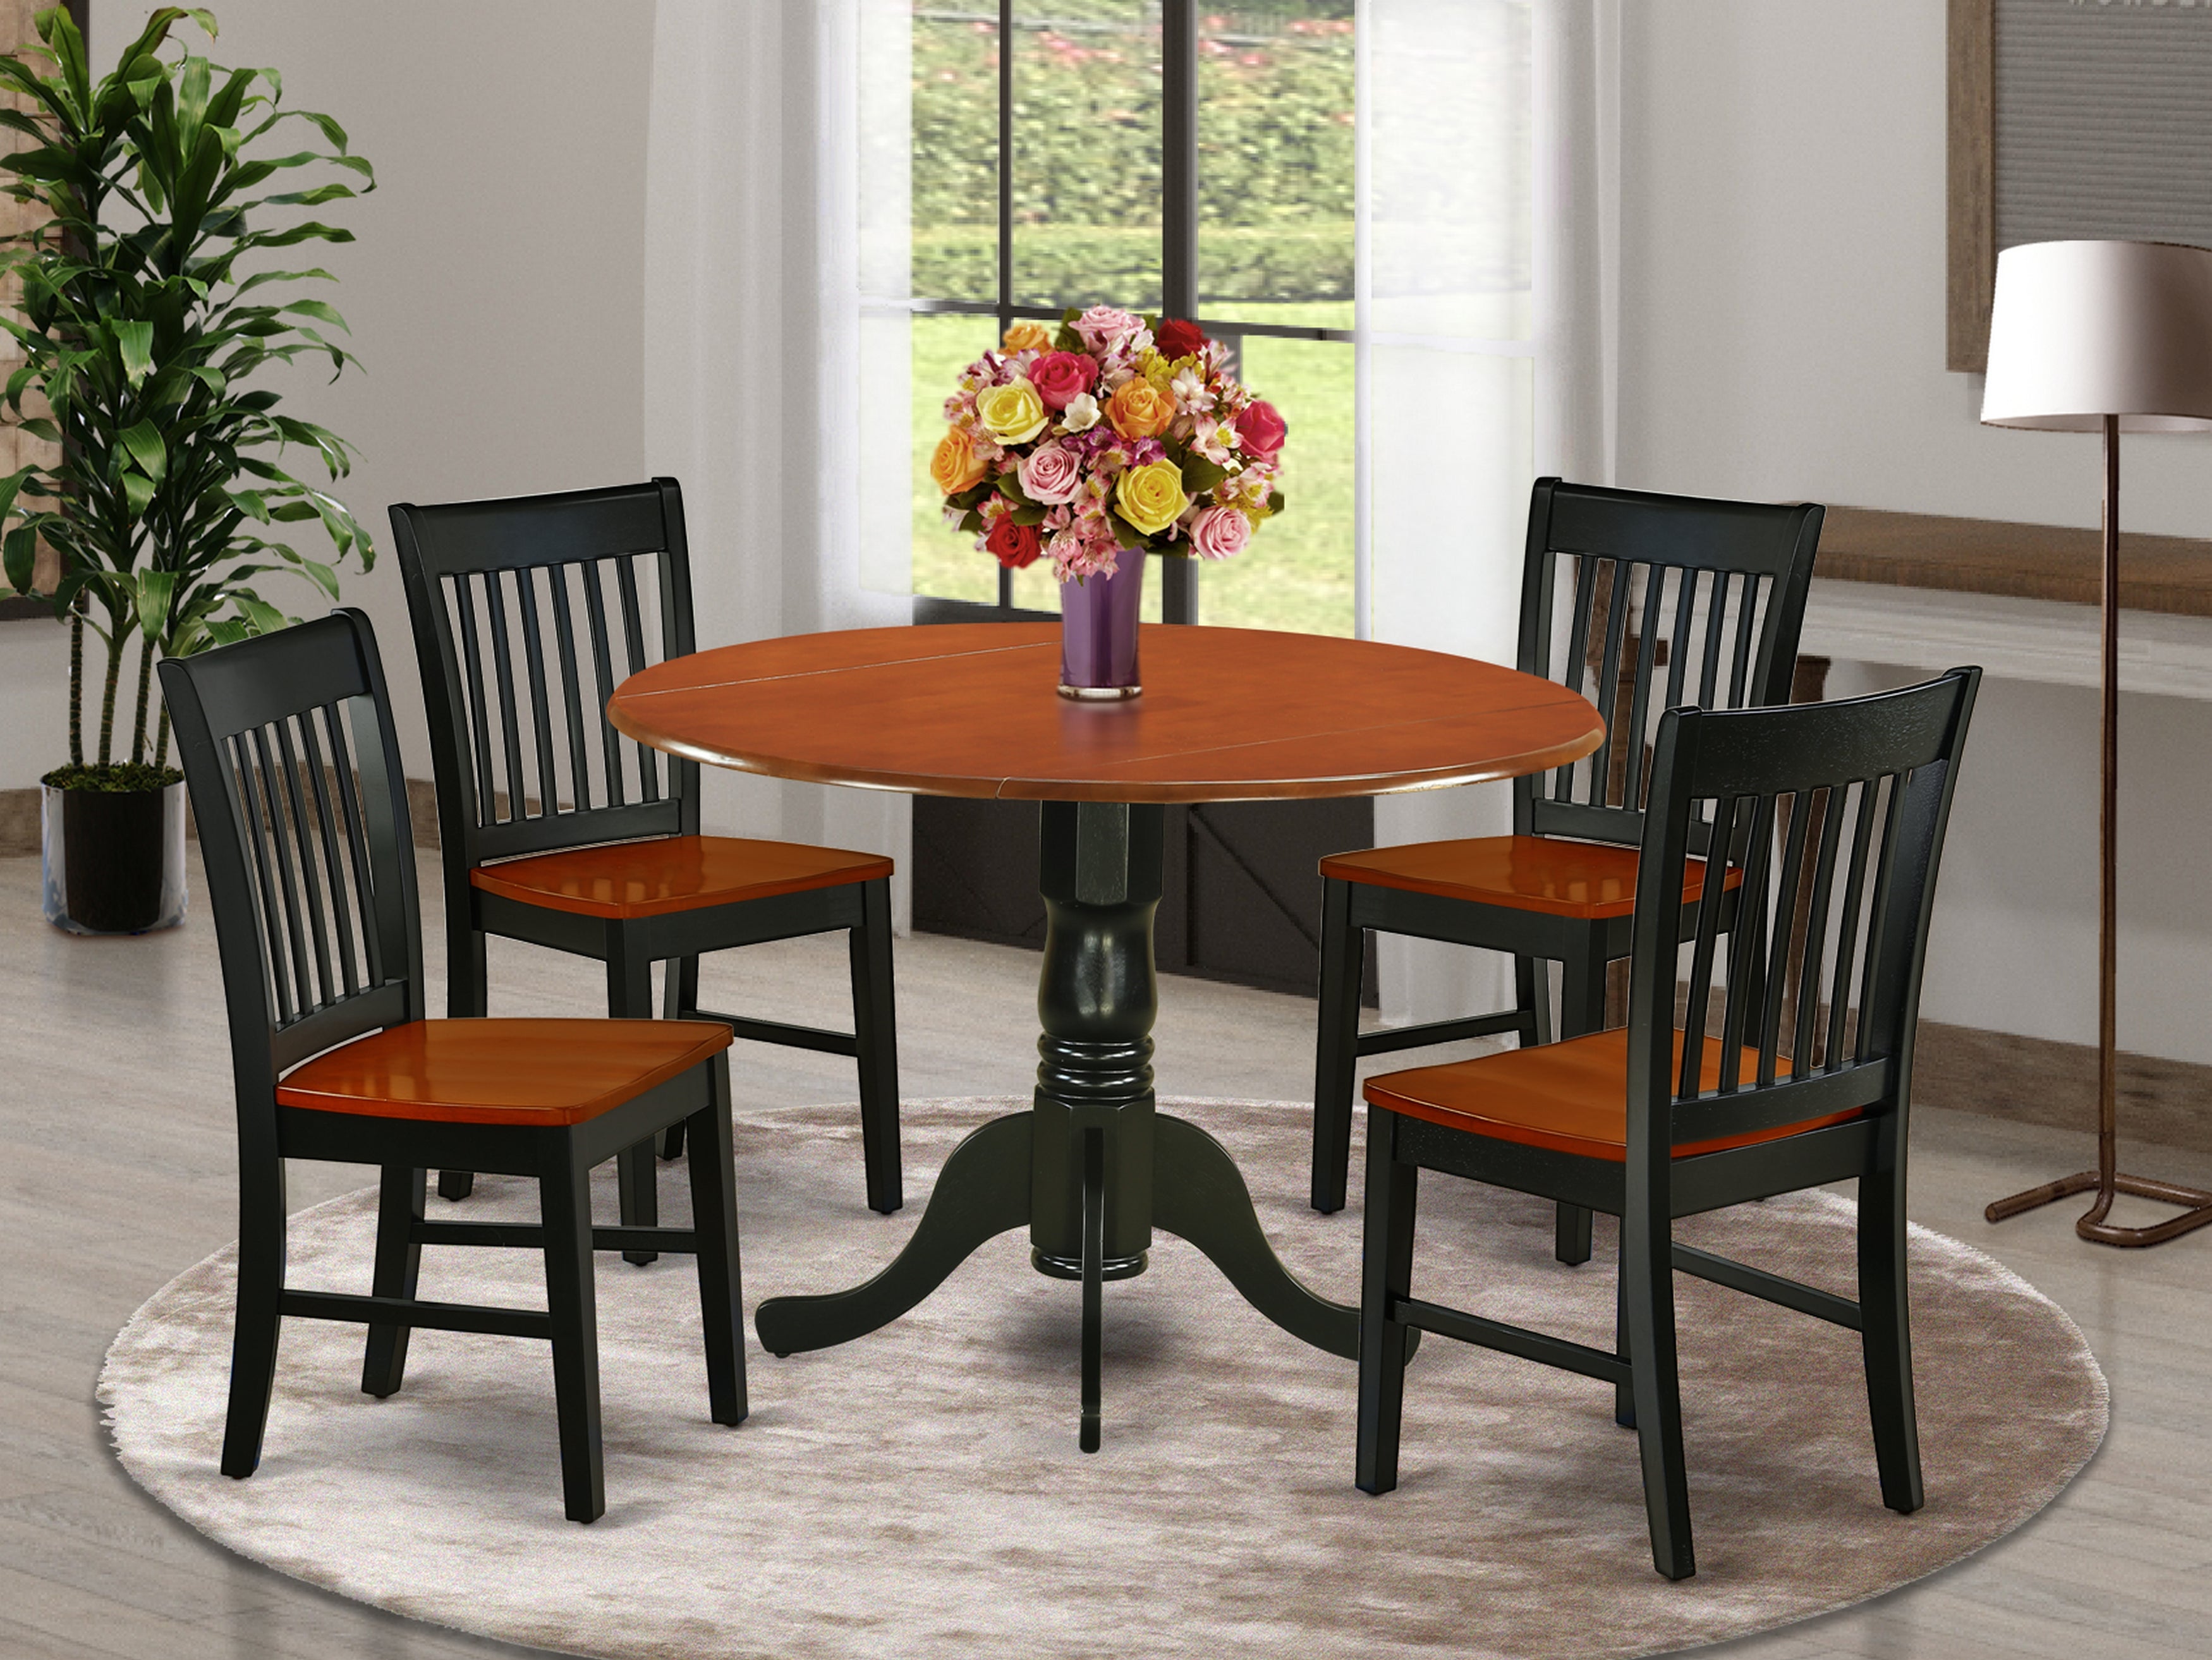 DLNO5-BCH-W 5Pc Rounded 42" Kitchen Table With Two 9-Inch Drop Leaves And Four Wood Seat Kitchen Chairs